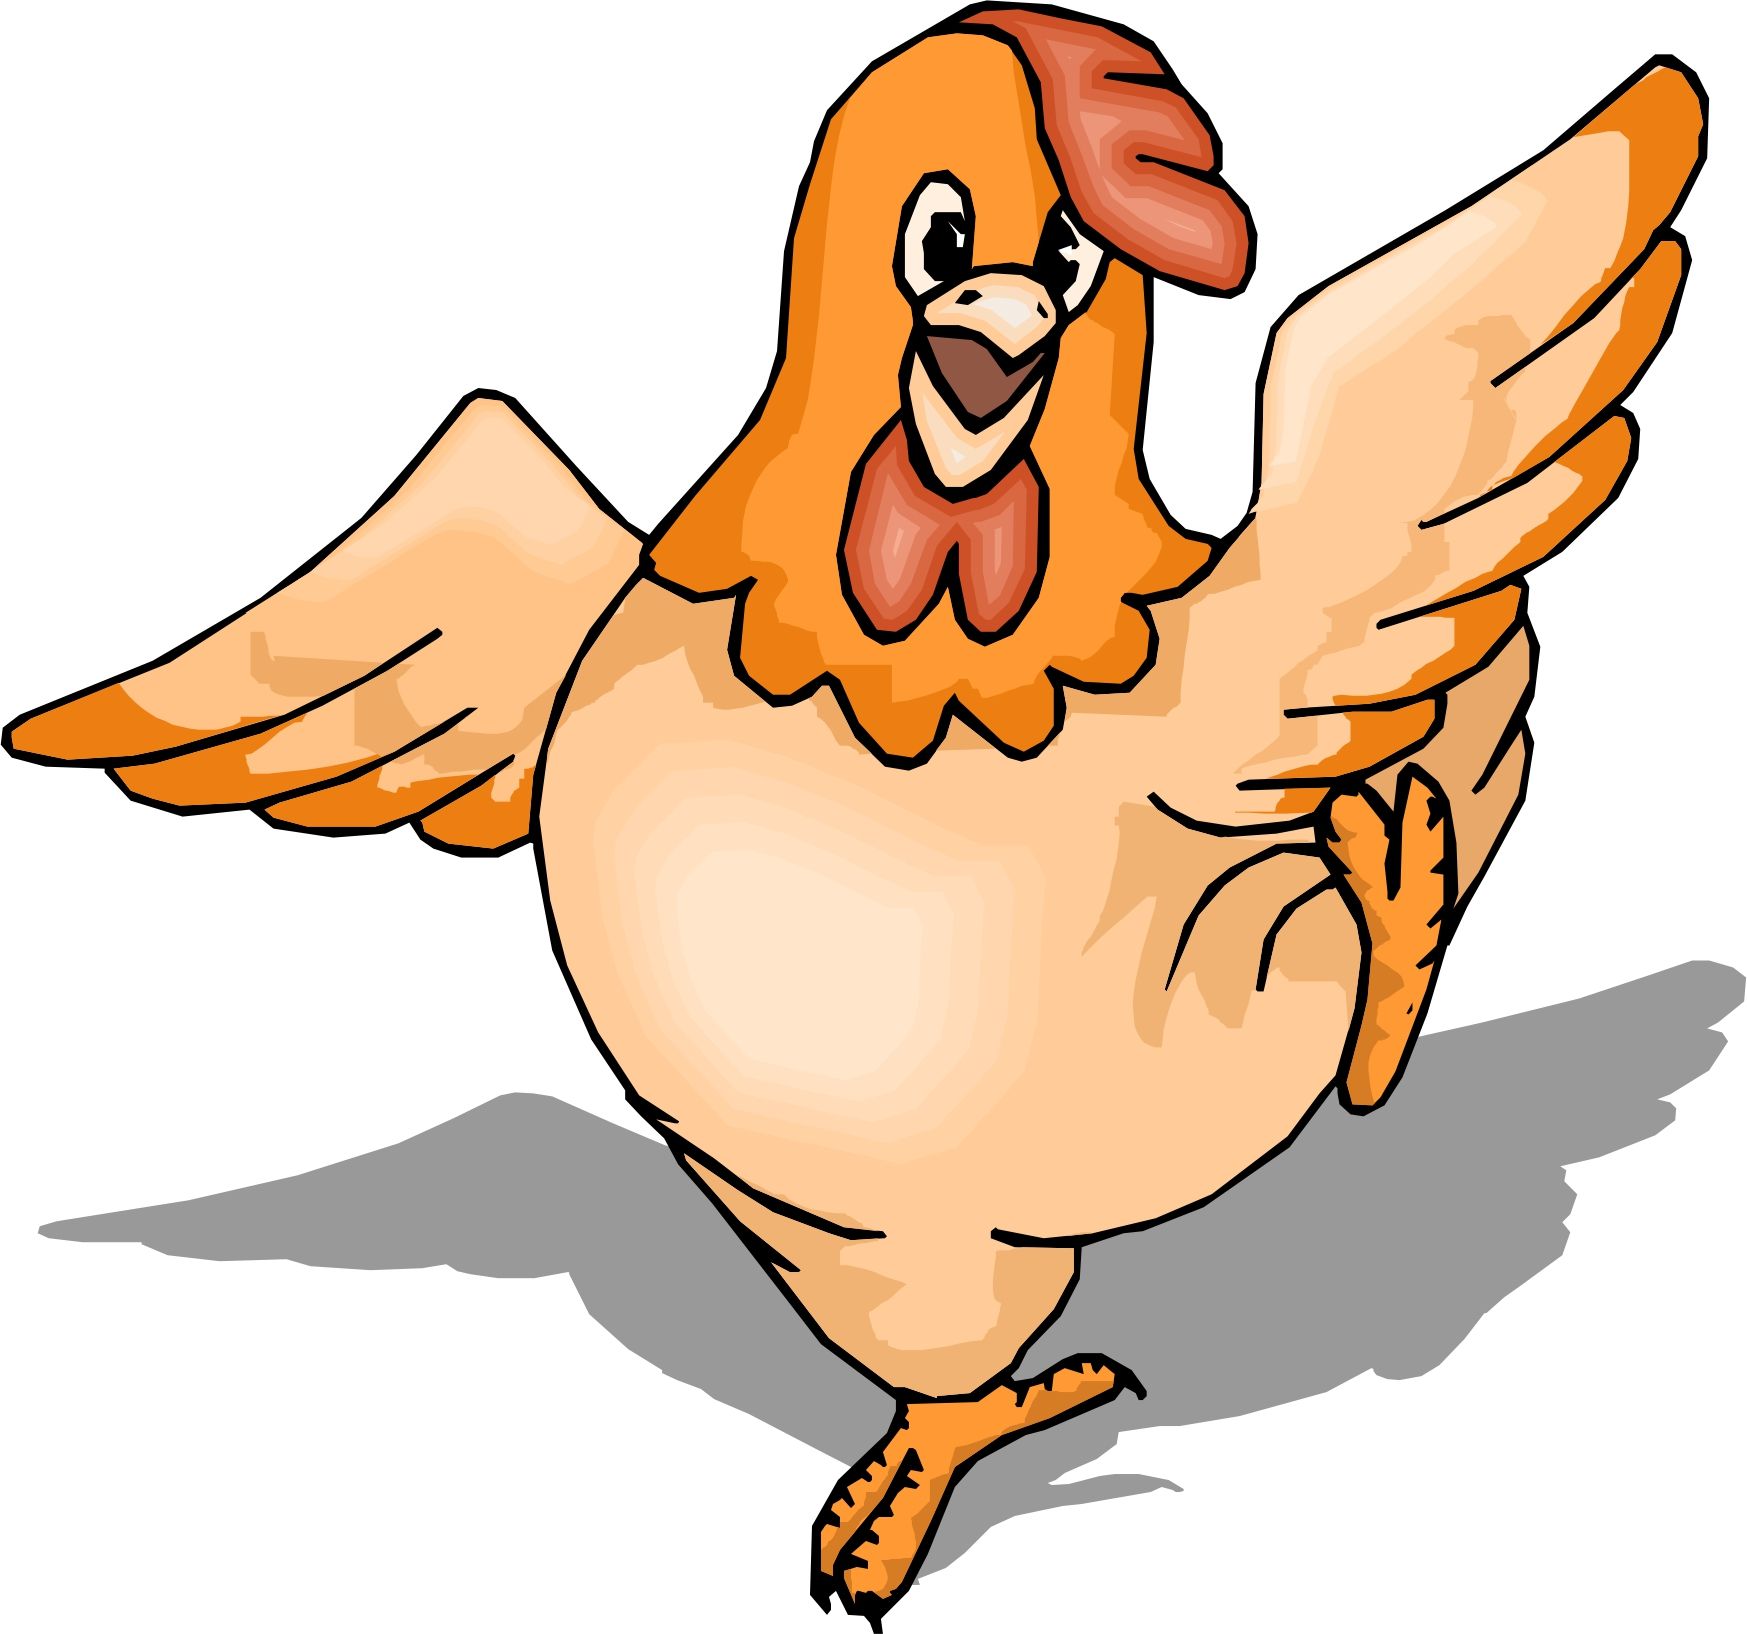 Free Chicken Pictures Cartoon, Download Free Clip Art, Free Clip.